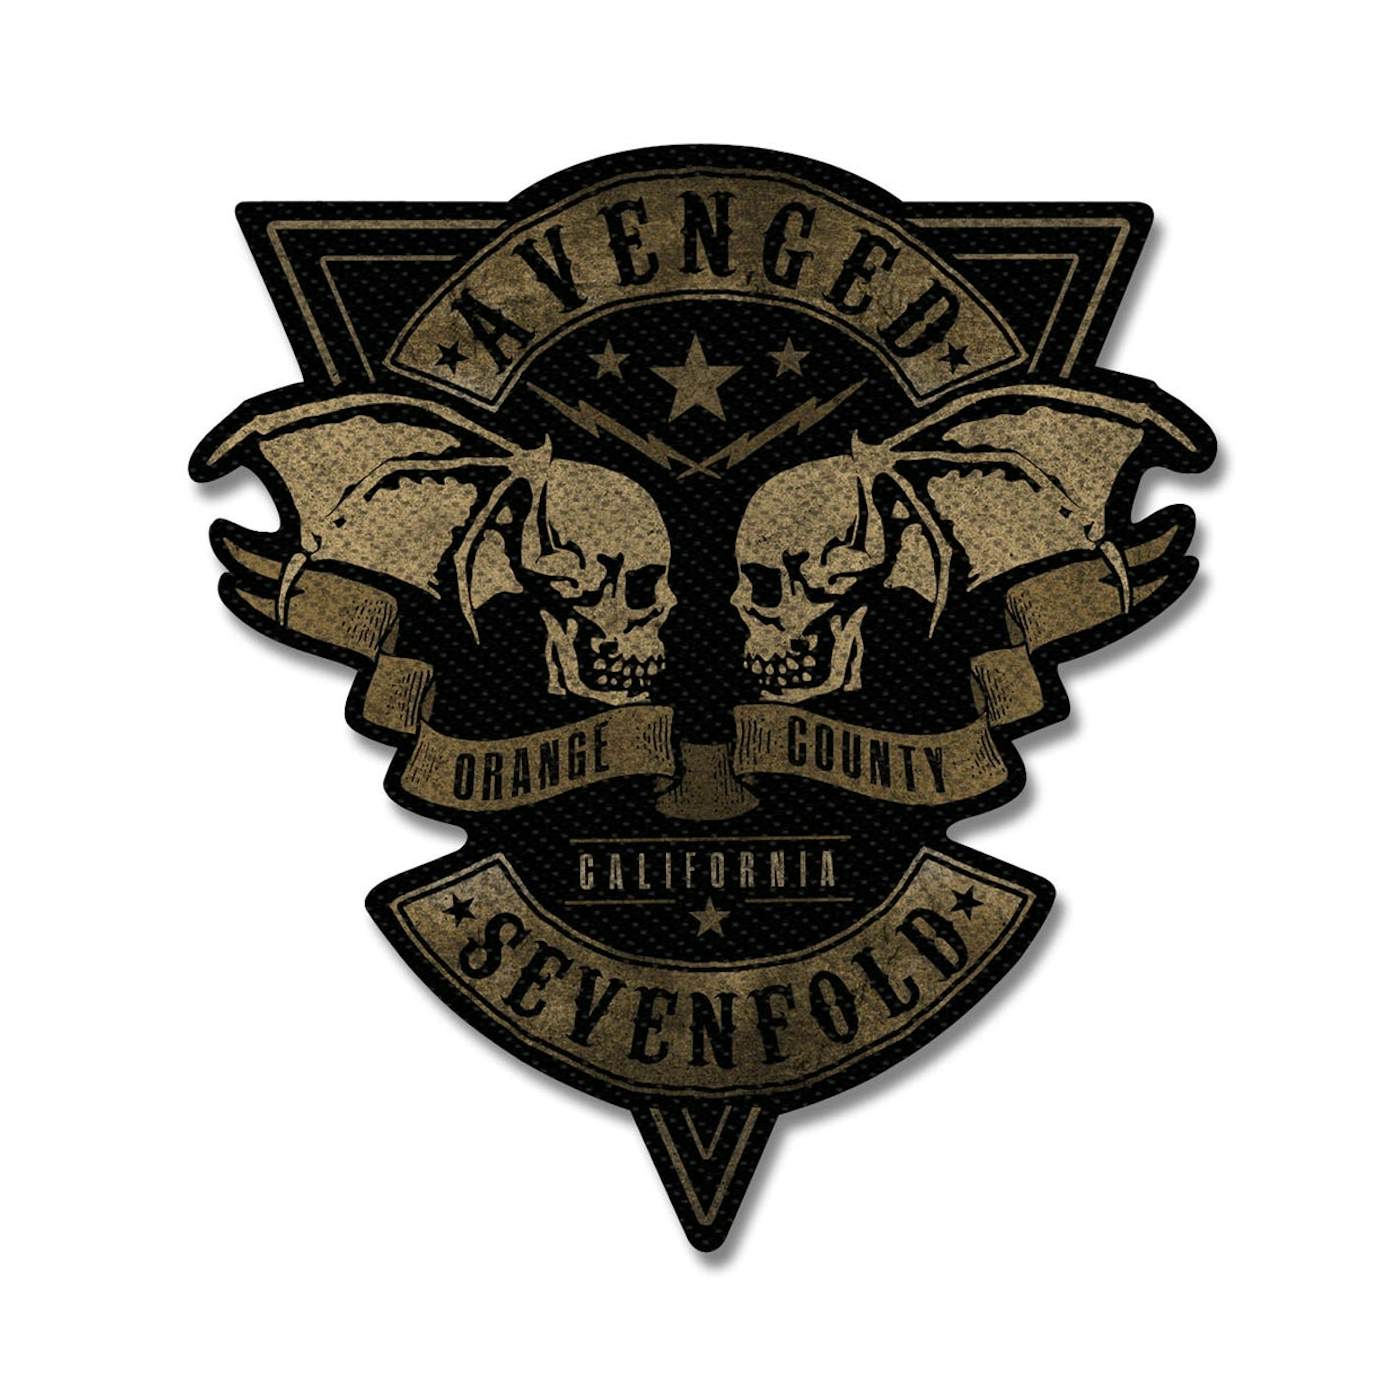 Avenged Sevenfold Sew-On Patch - Orange County Cut Out